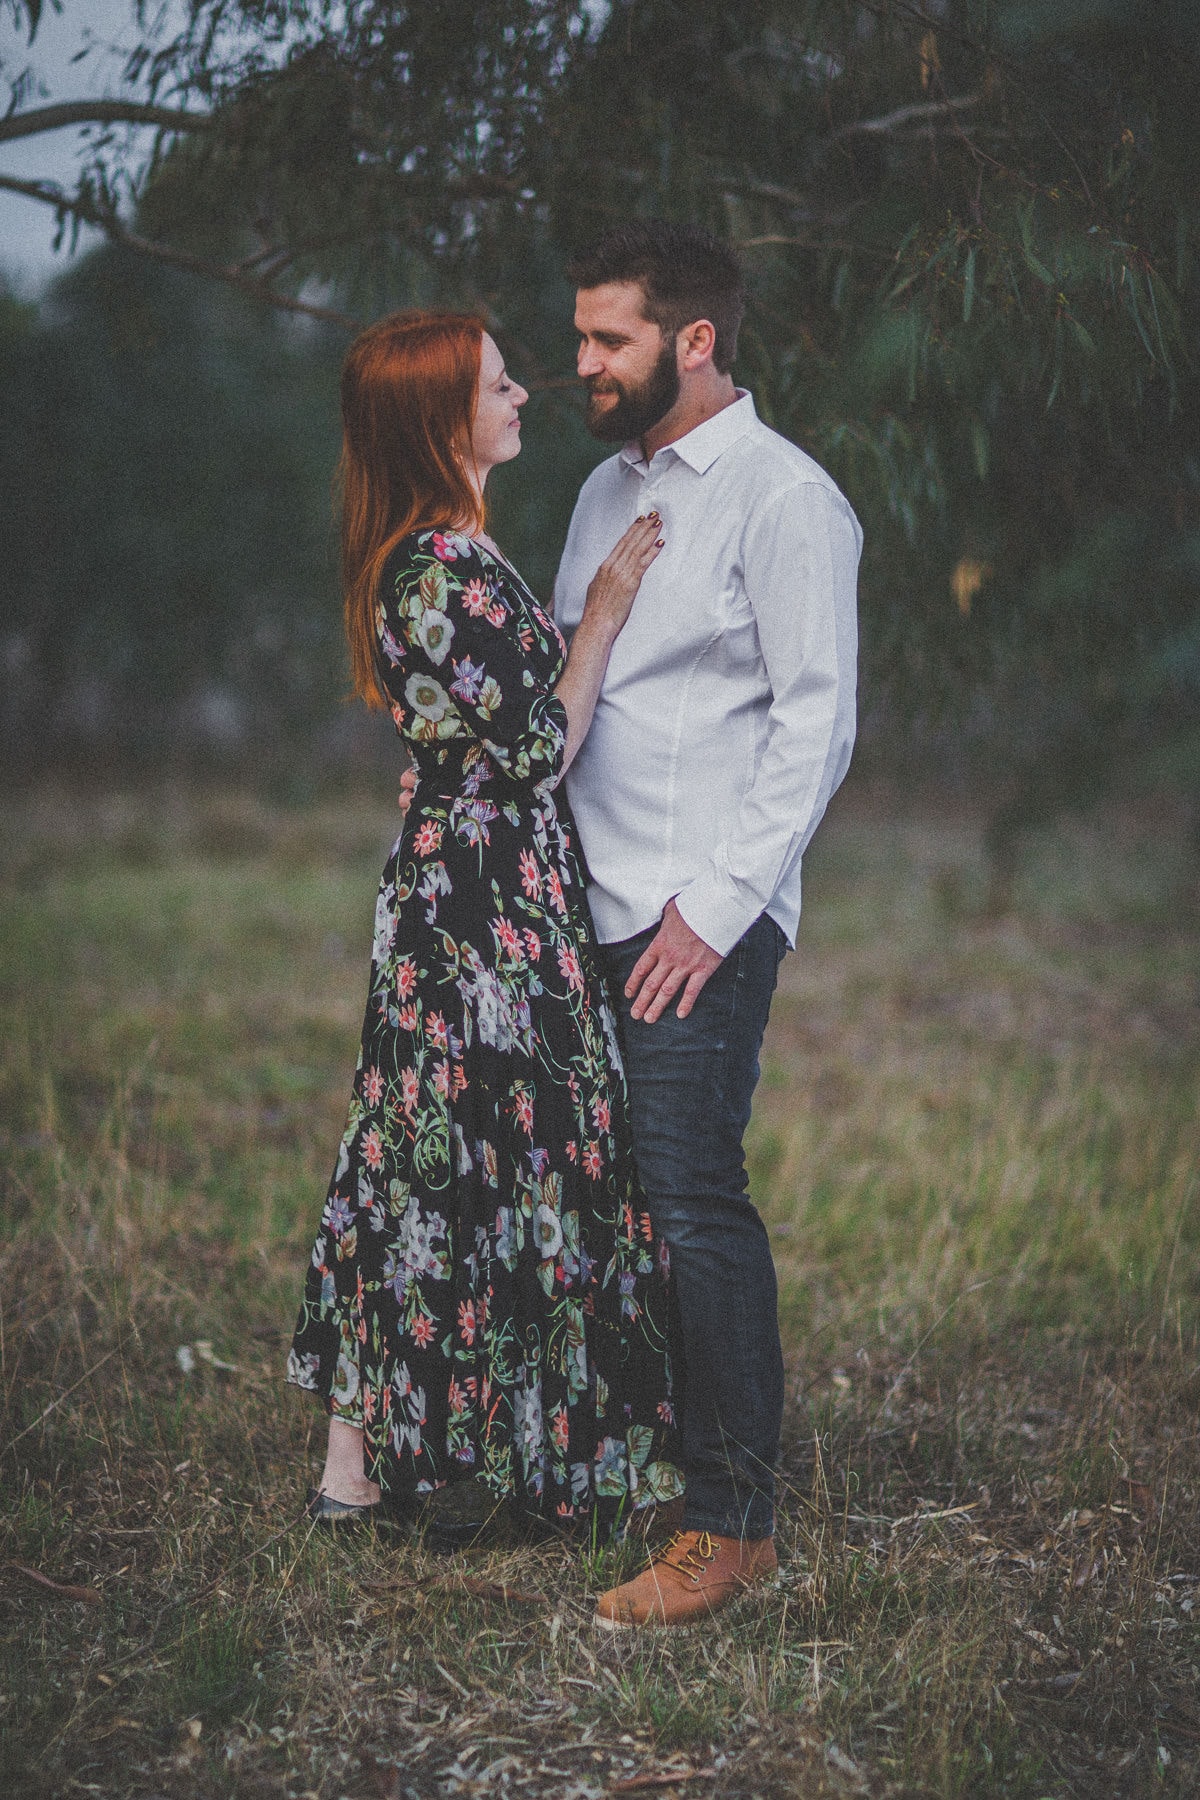 Melbourne Couples Photographer - Photography in Melbourne park for weddings and engagements